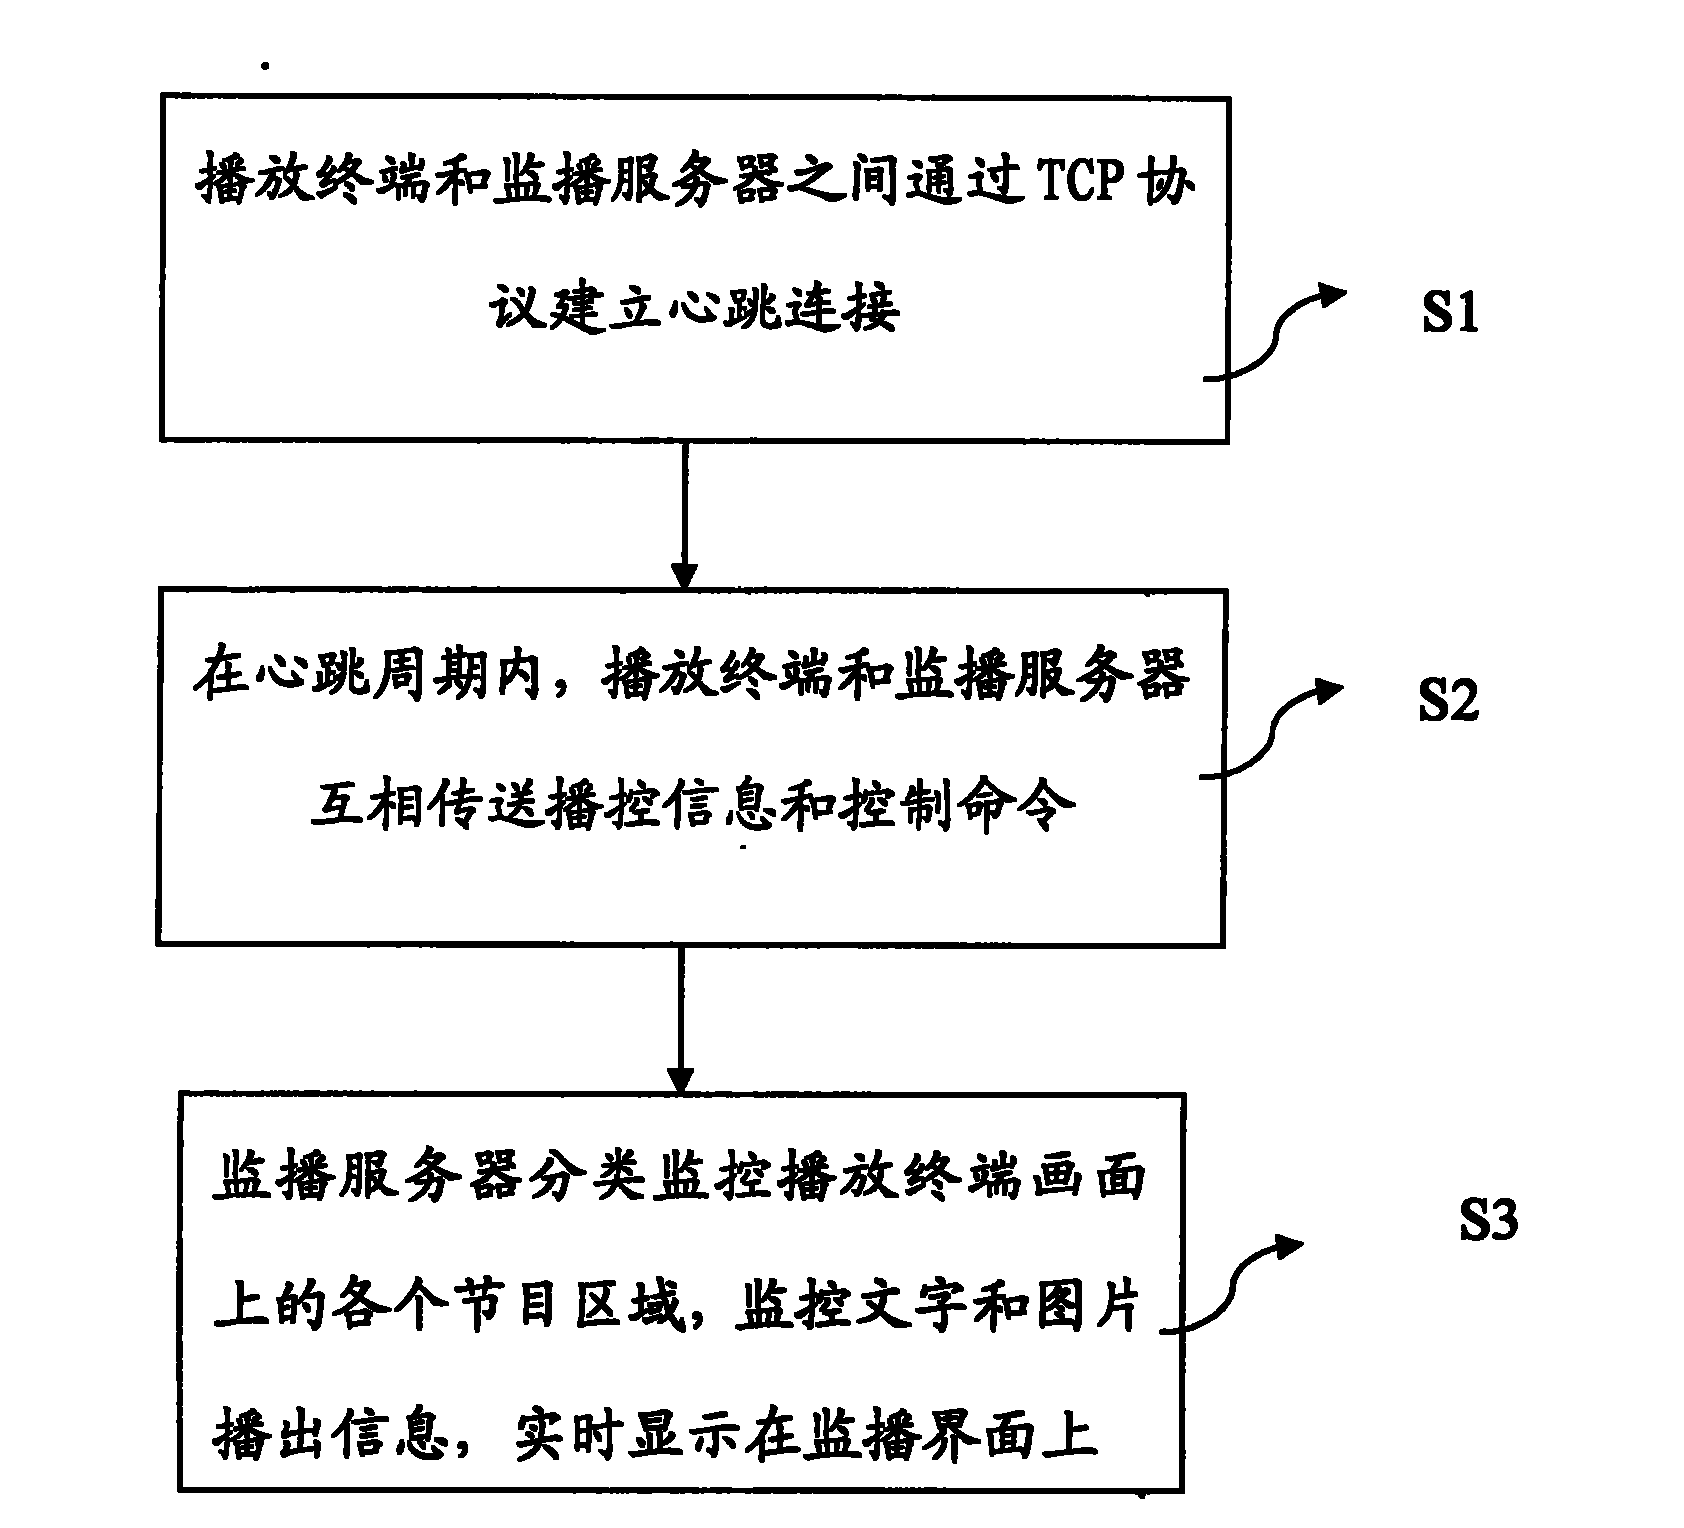 Method for locally monitoring multimedia playing